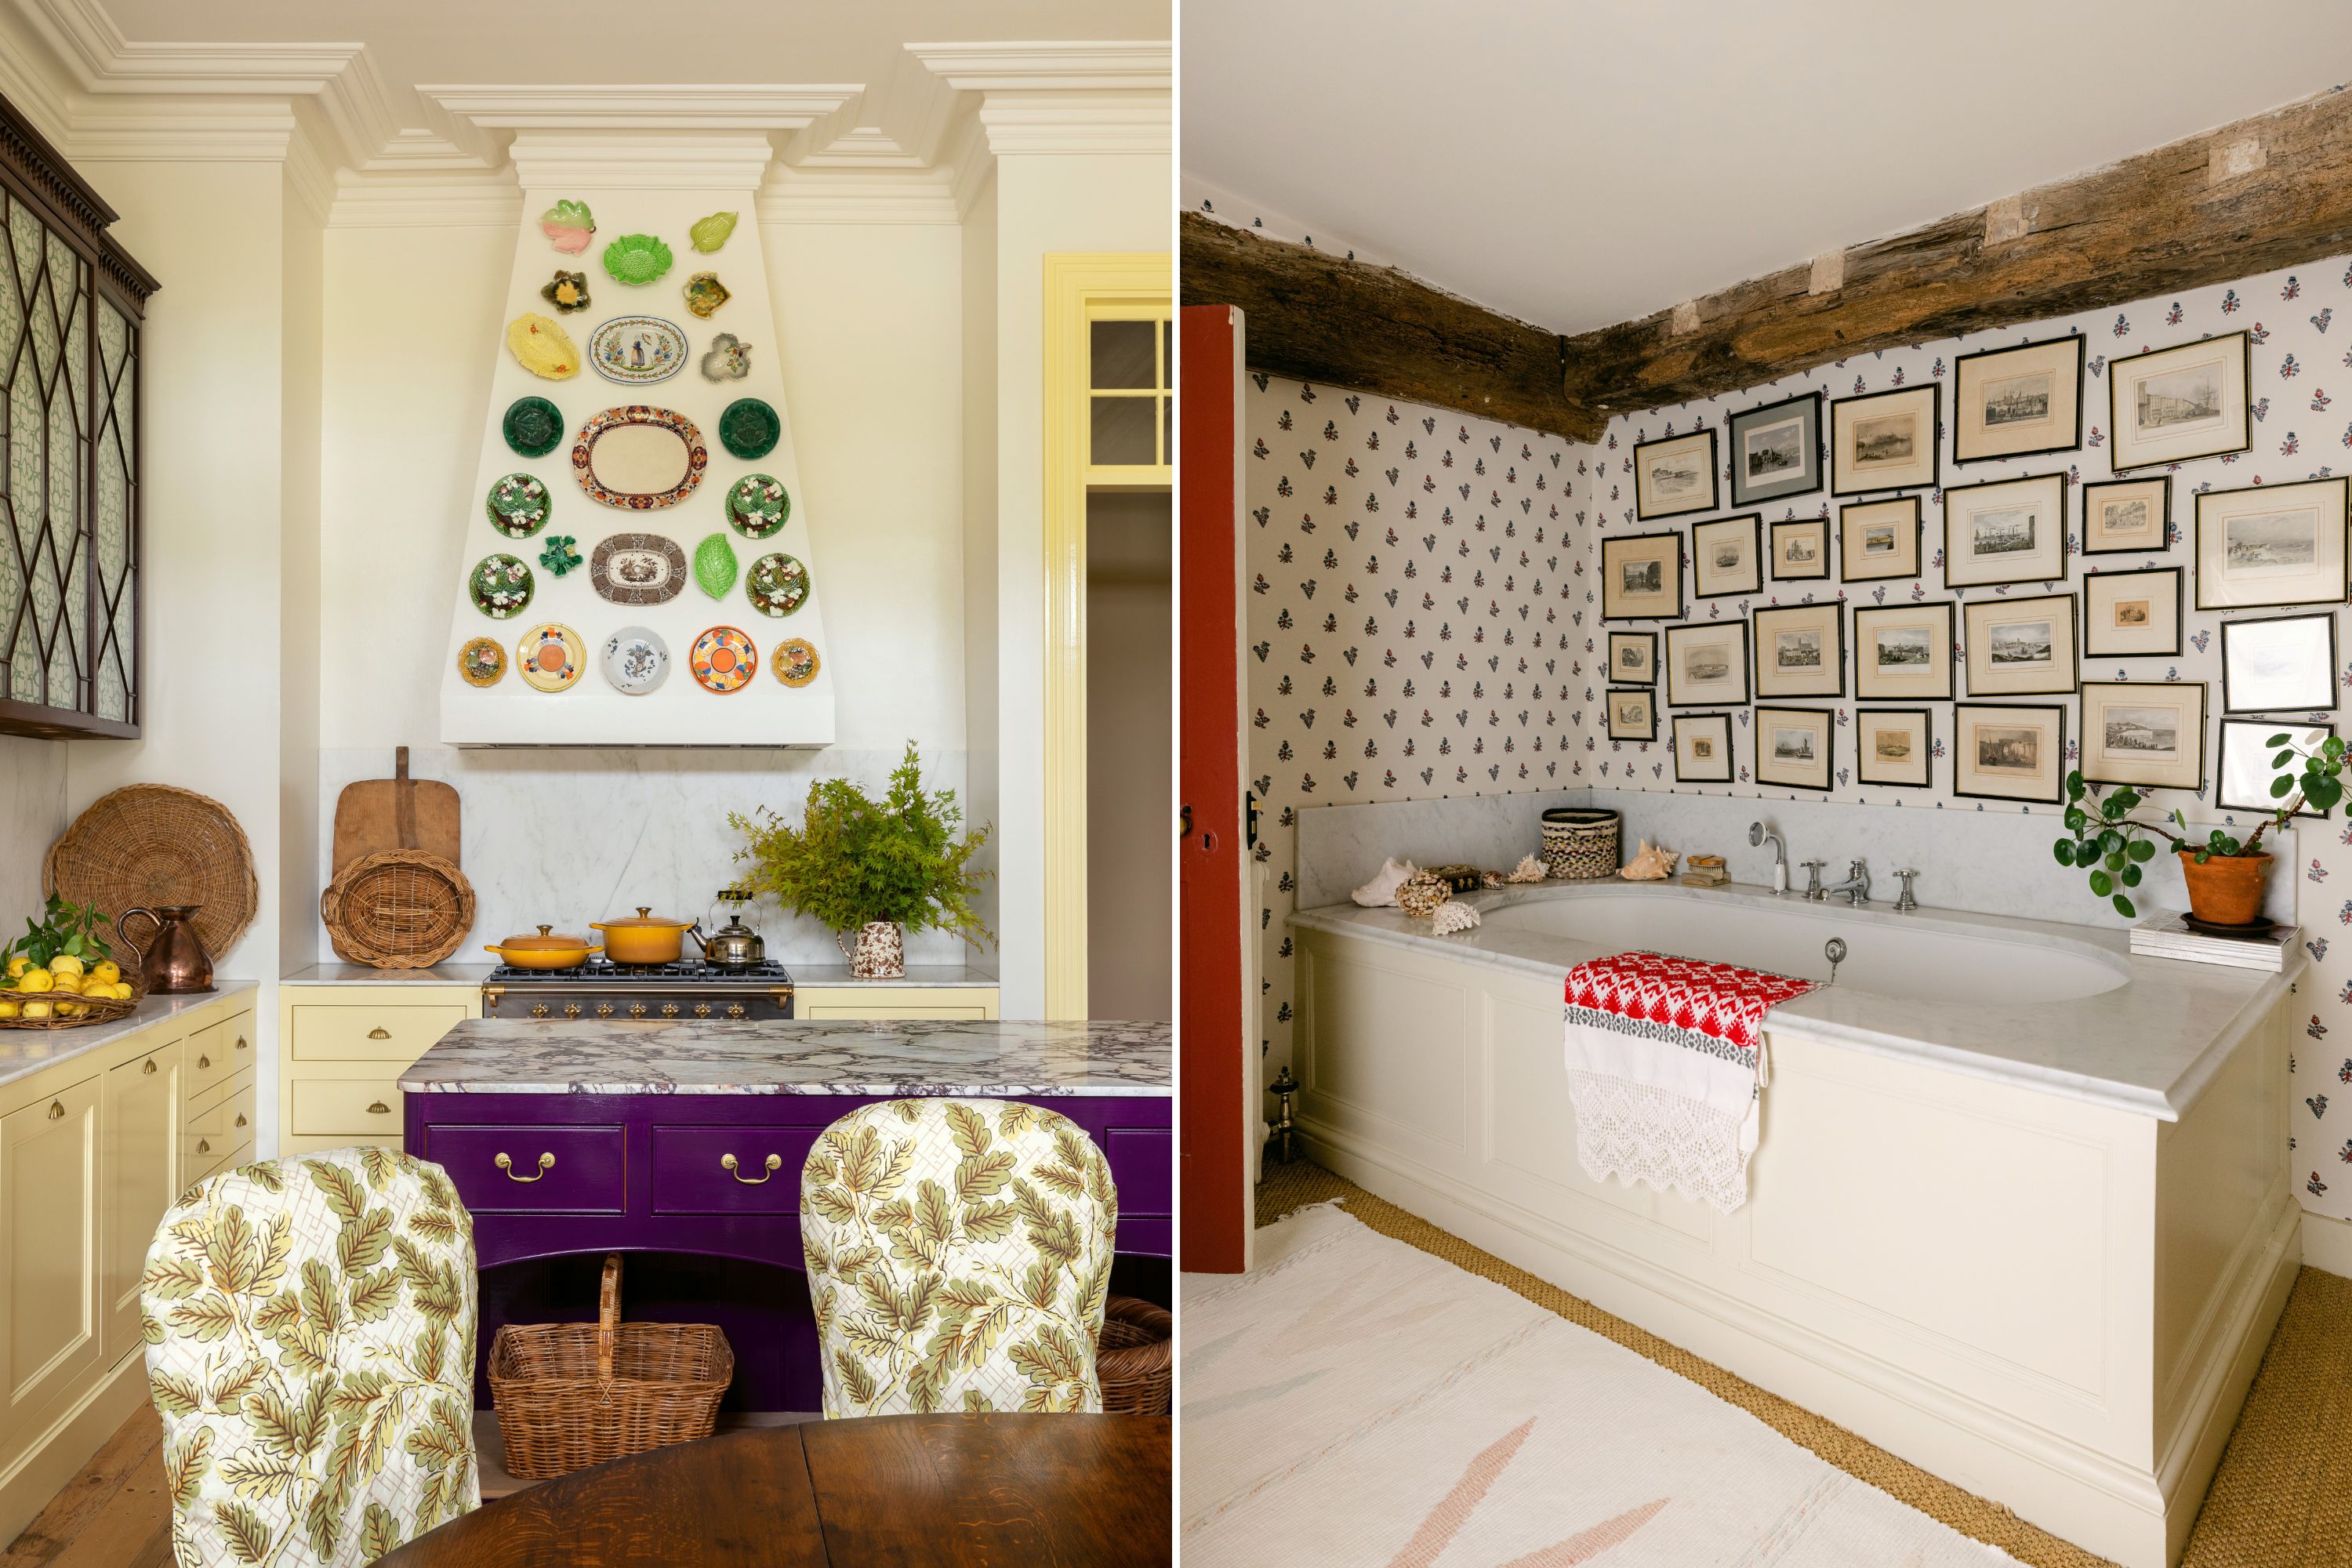 An eclectic kitchen with plates on a wall; a bathroom with a patterned wallpaper and many framed photos.